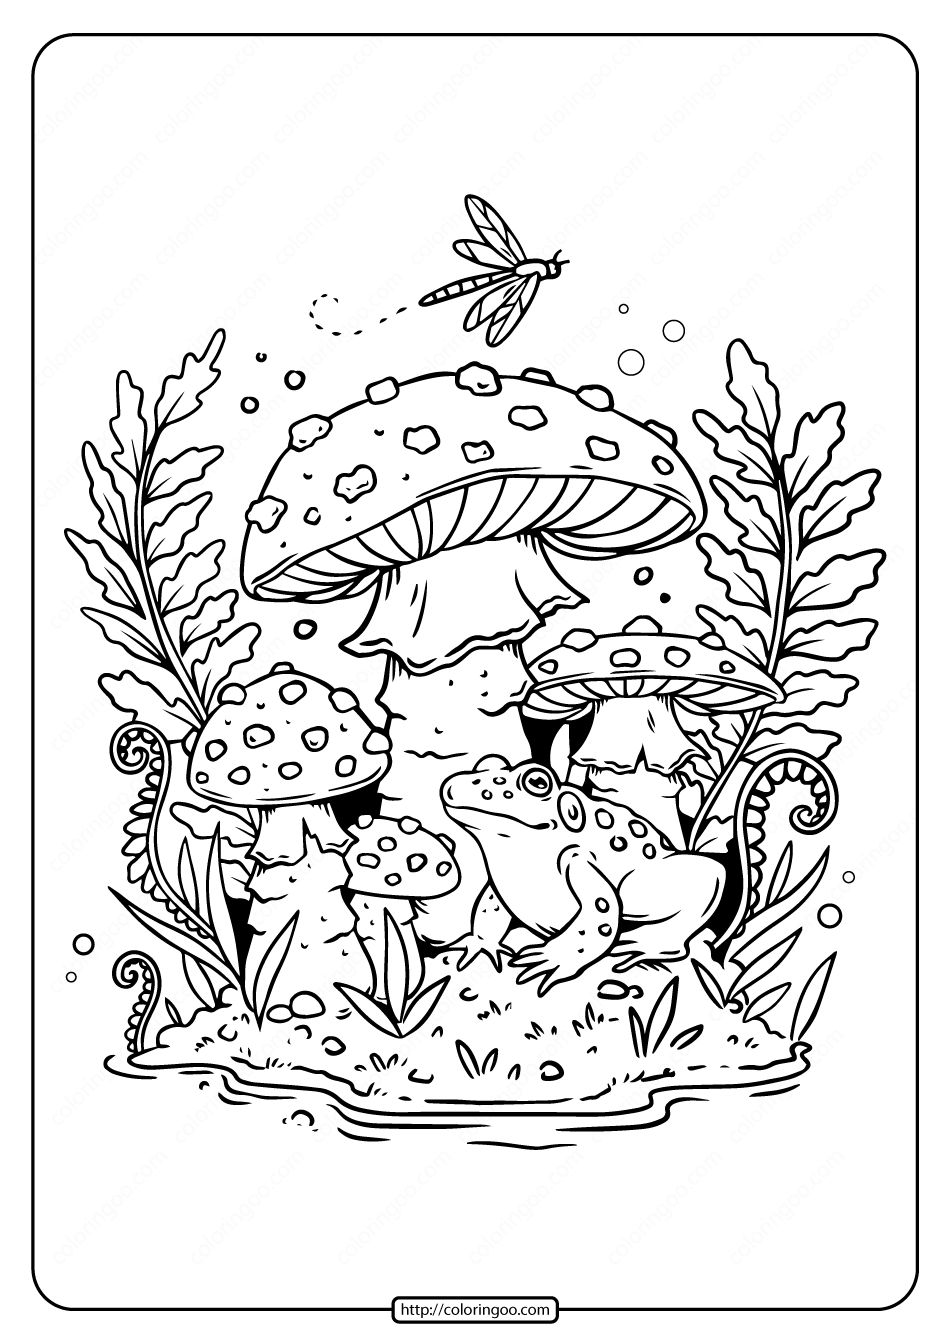 printable frog and mushroom coloring pages